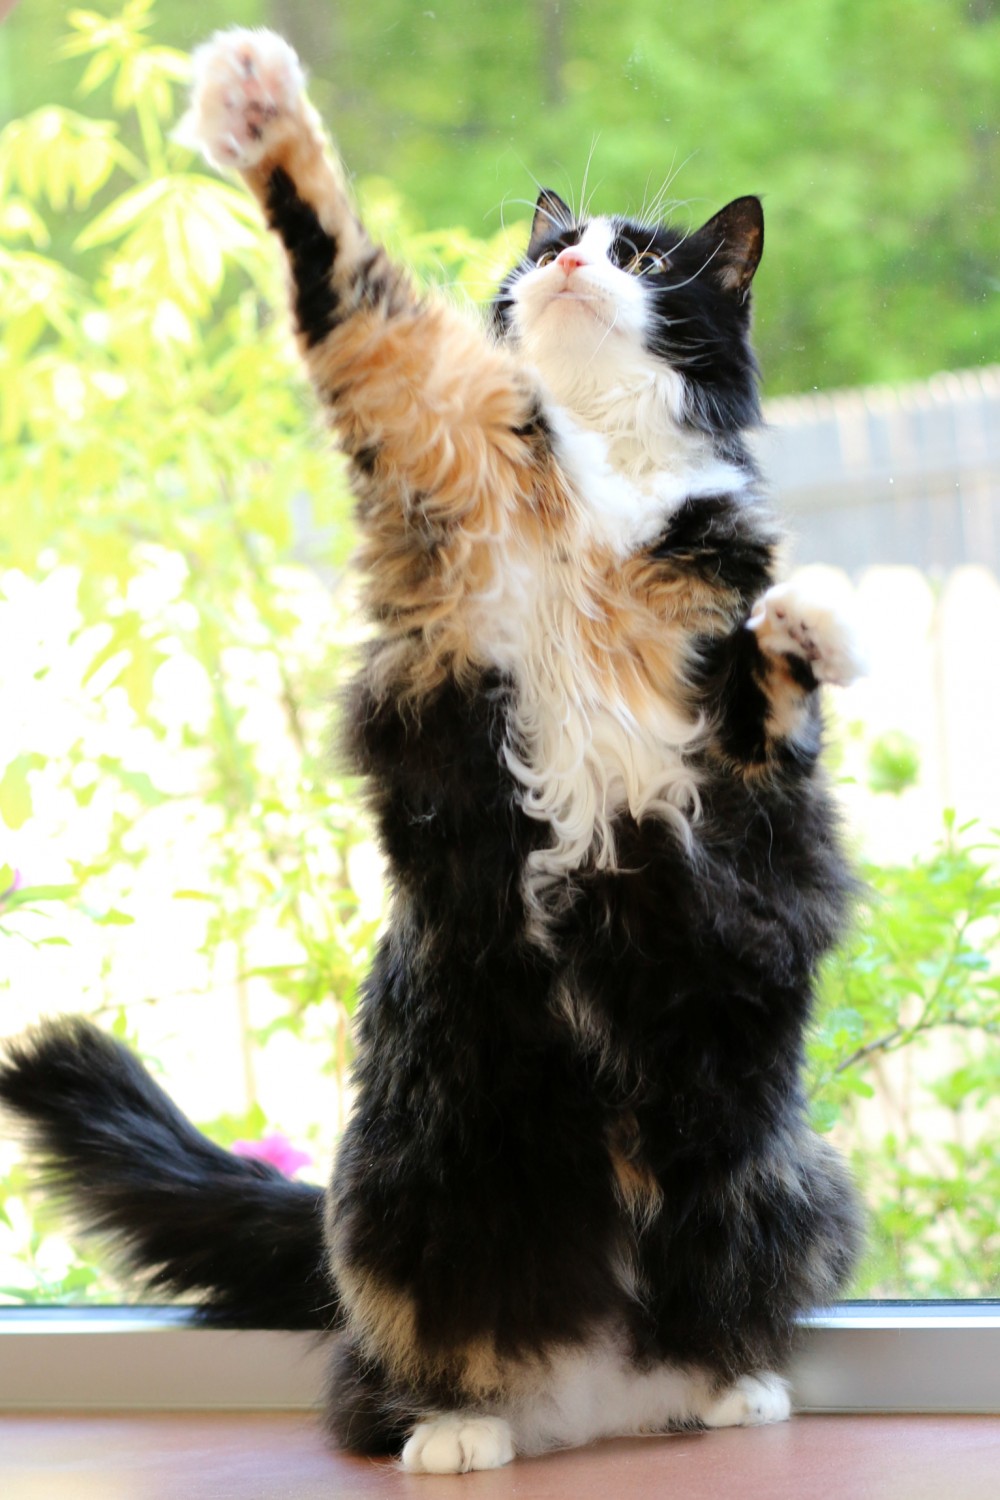 Large cat on its hind legs reaching up with front paw